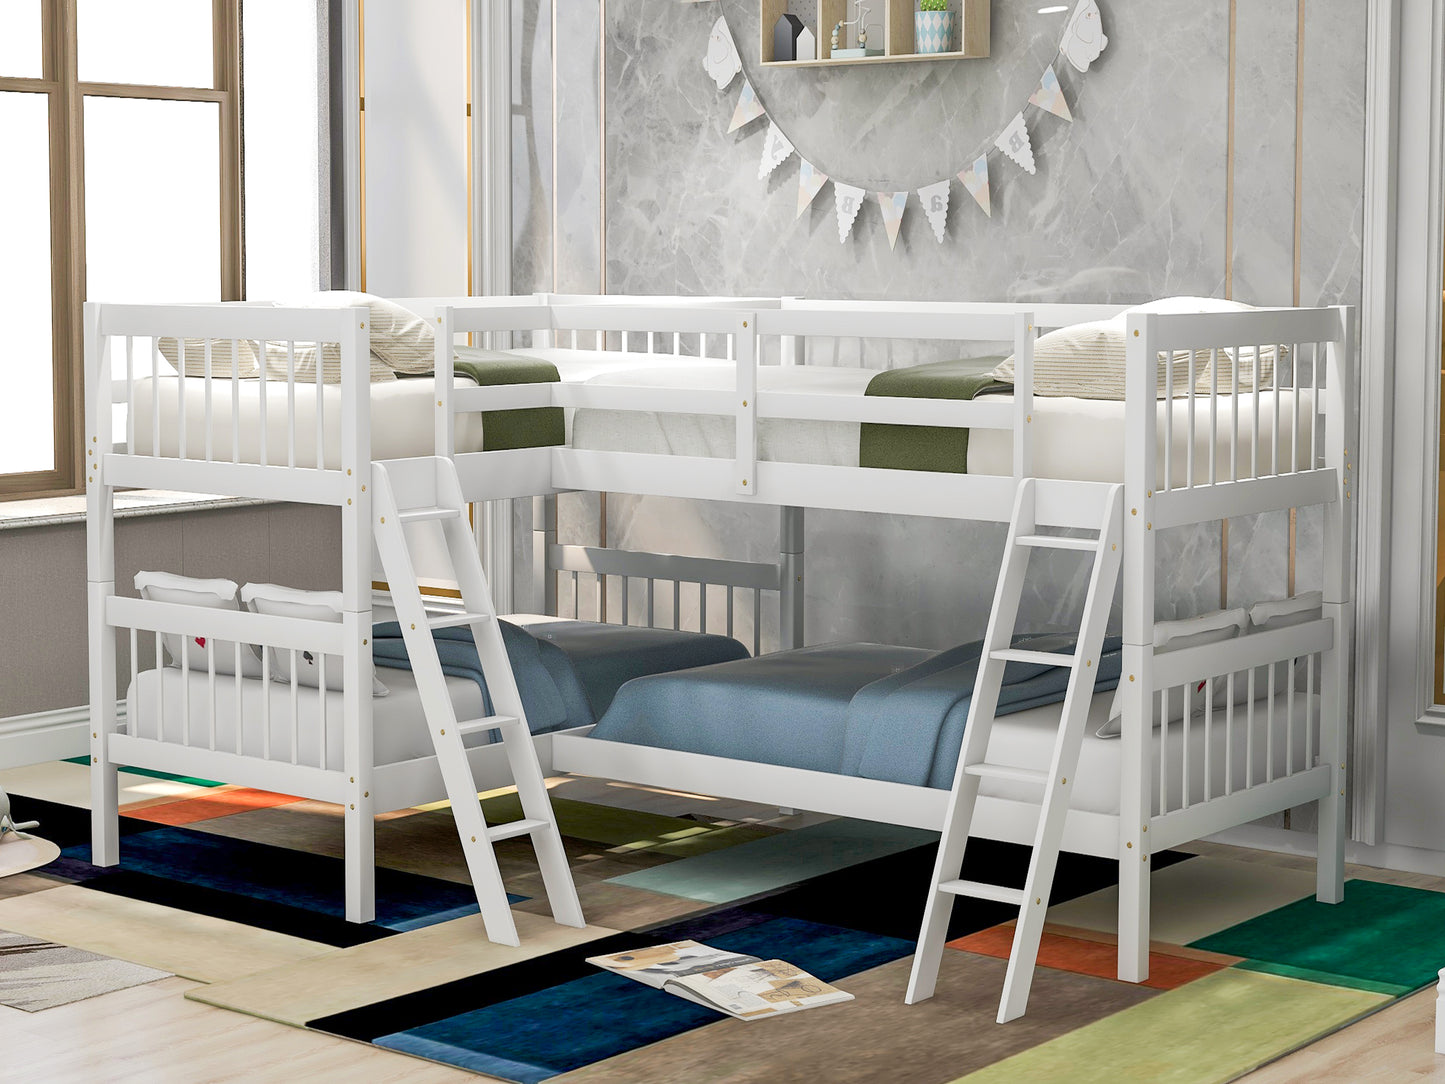 L-Shaped Bunk Bed with Ladder,Twin Size-Gray